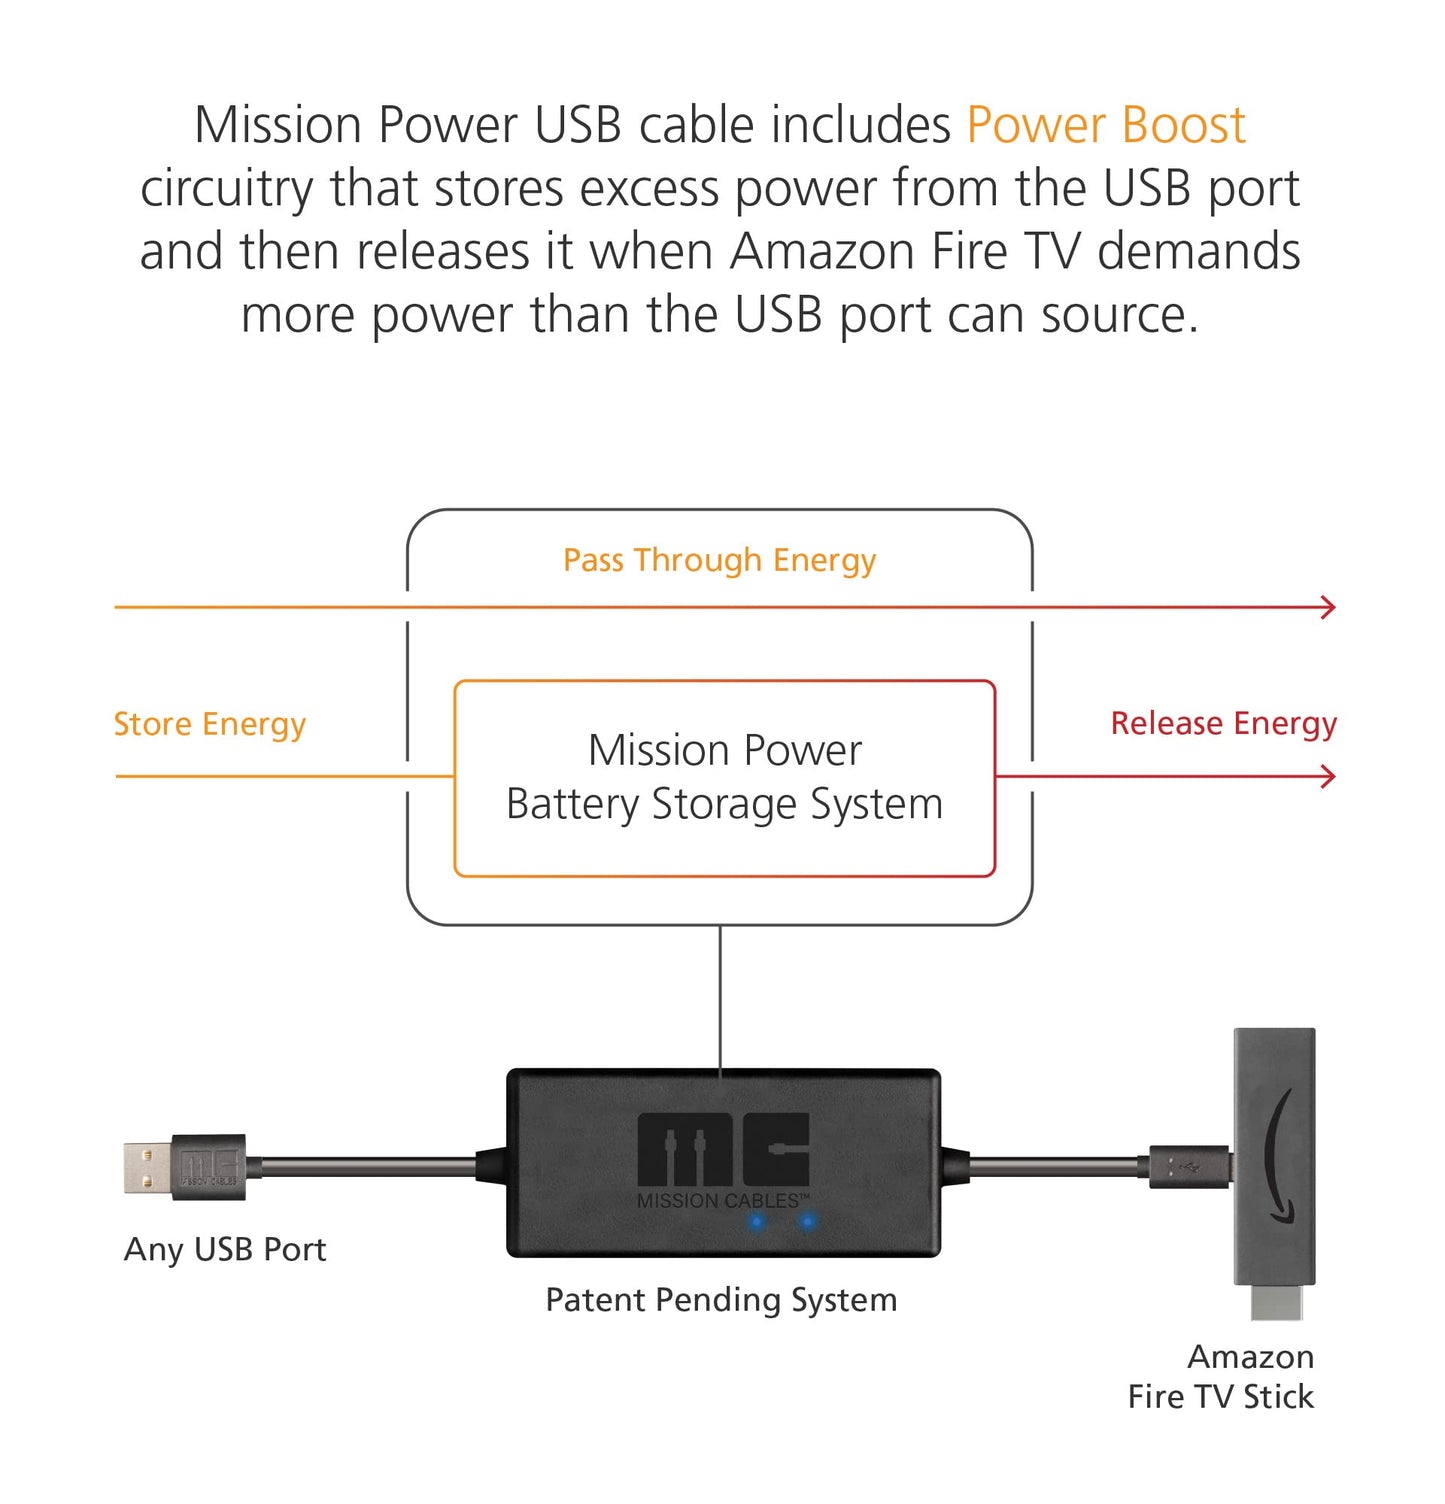 Made for Amazon, USB Power Cable (Eliminates the Need for AC Adapter)